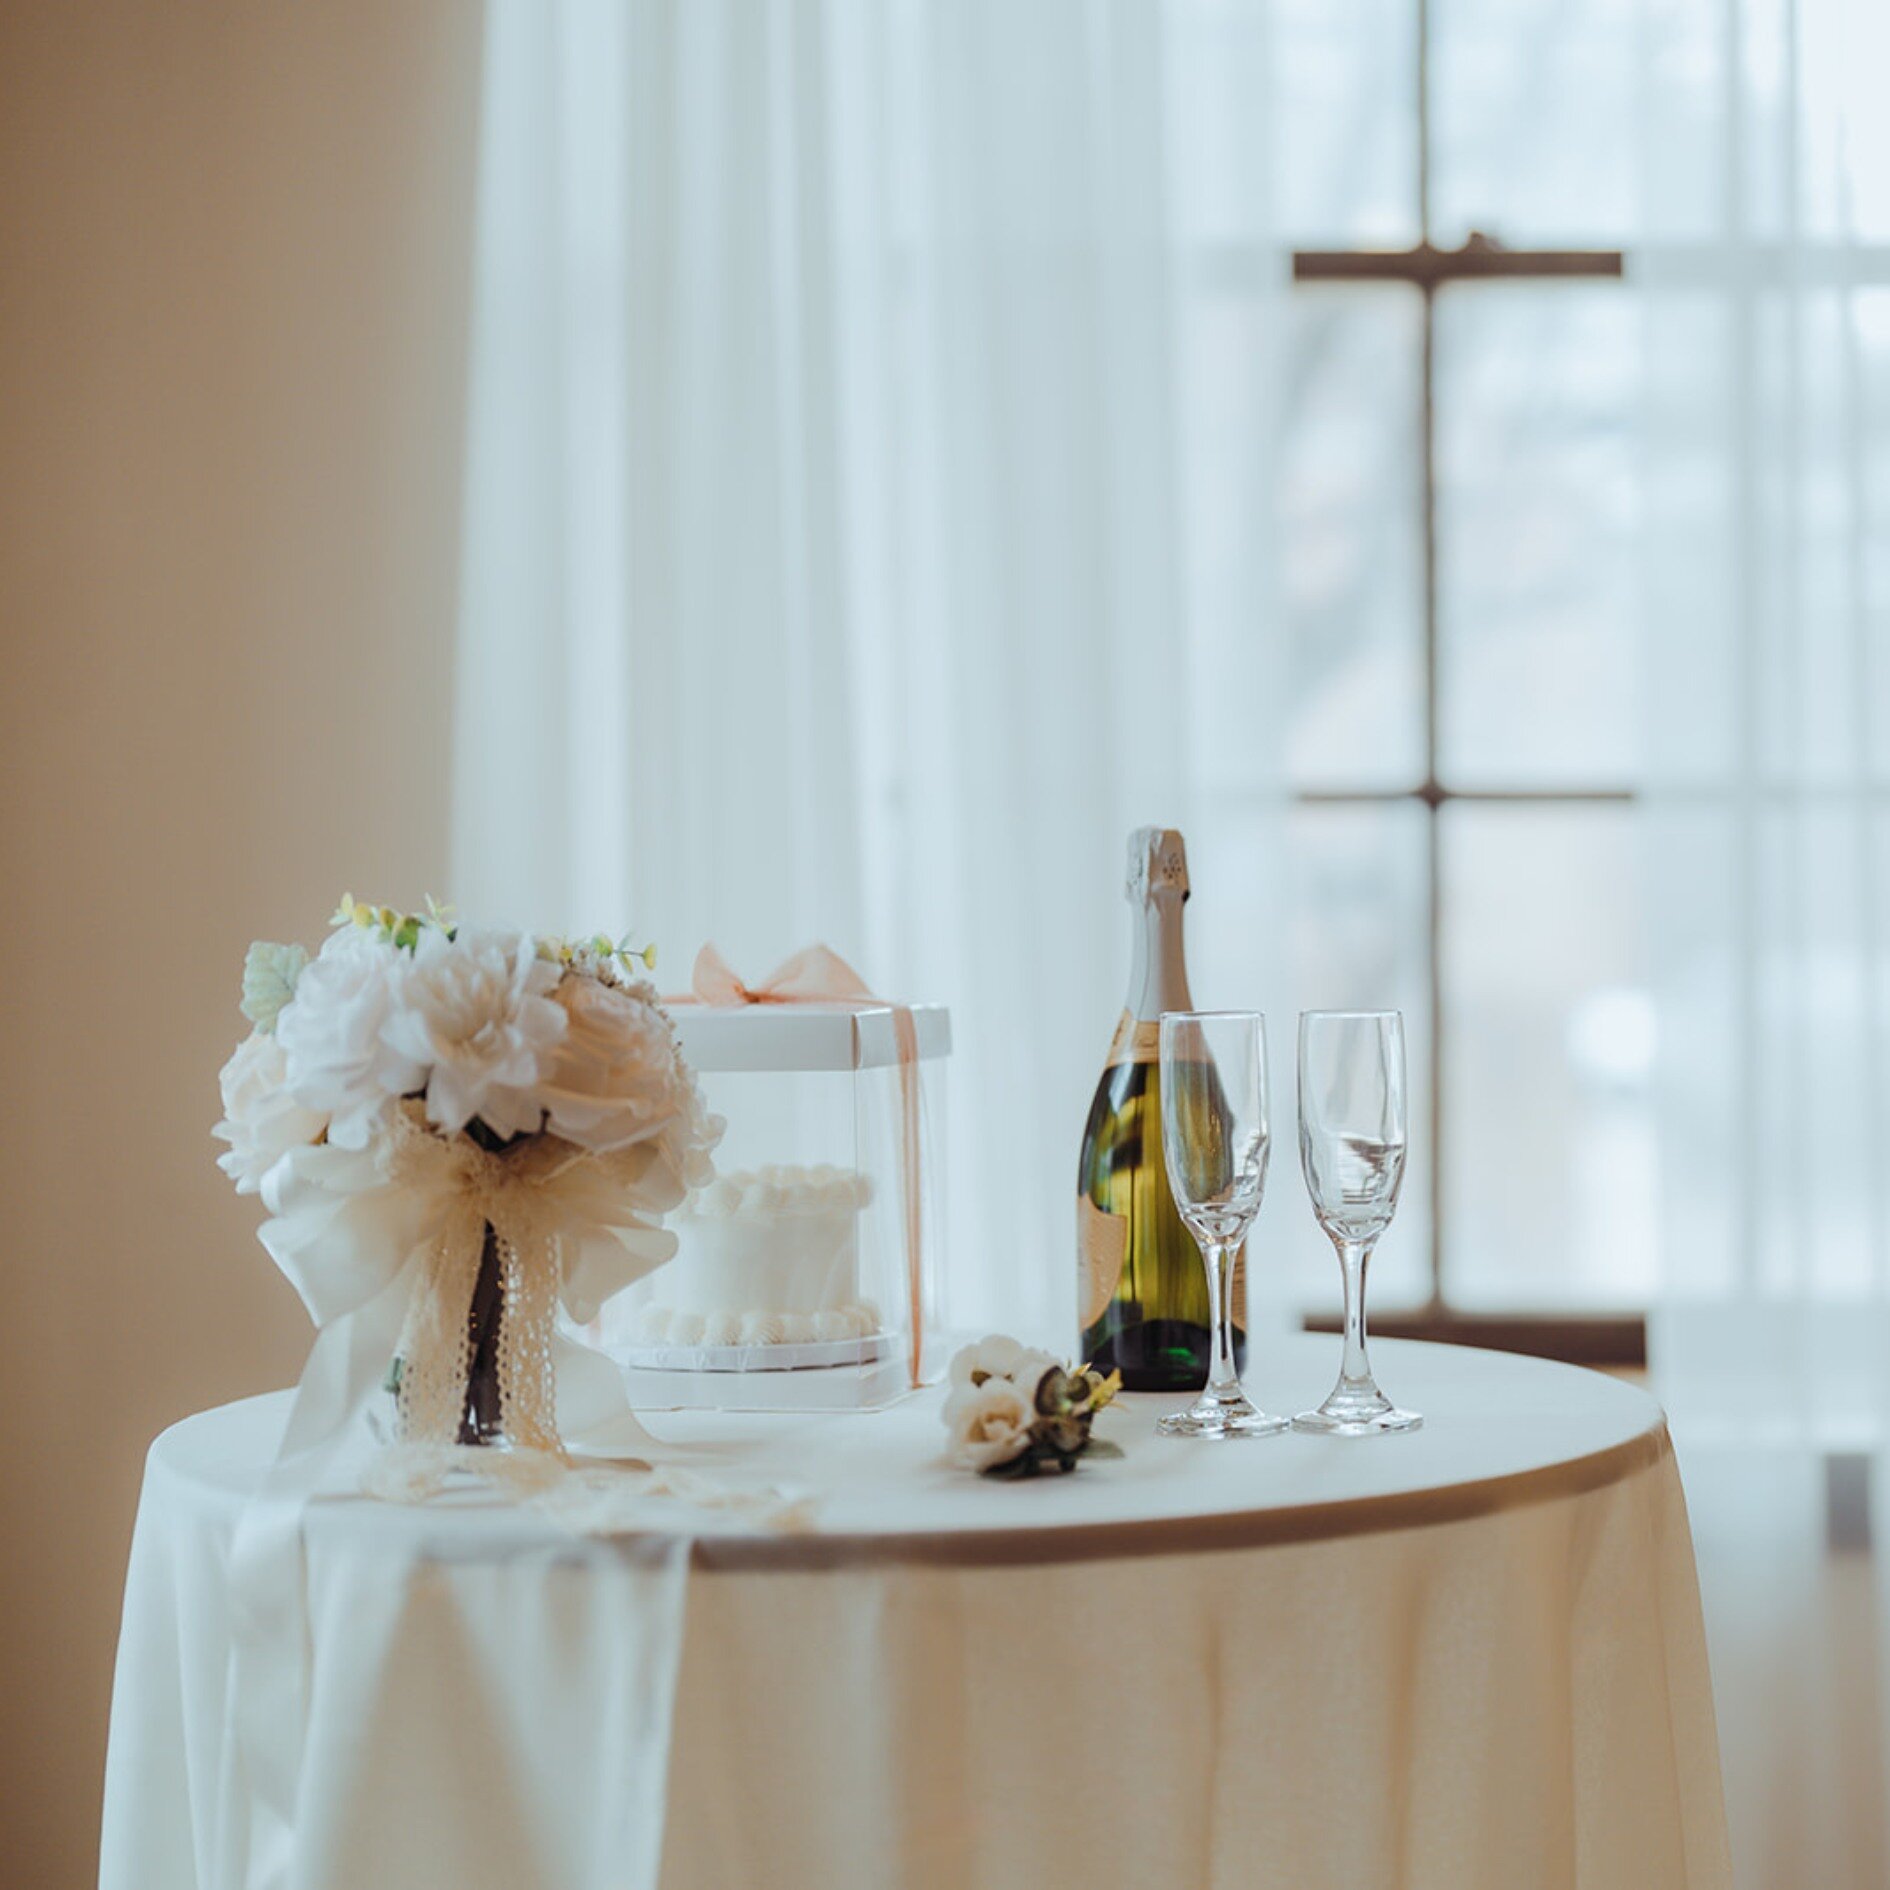 Forever begins in the most magical way. Surround yourself with your closest loved ones and enjoy every moment of an intimate ceremony. Celebrate love, laughter, and your future together with Micro Weddings at Historic 512
https://www.historic512.com/